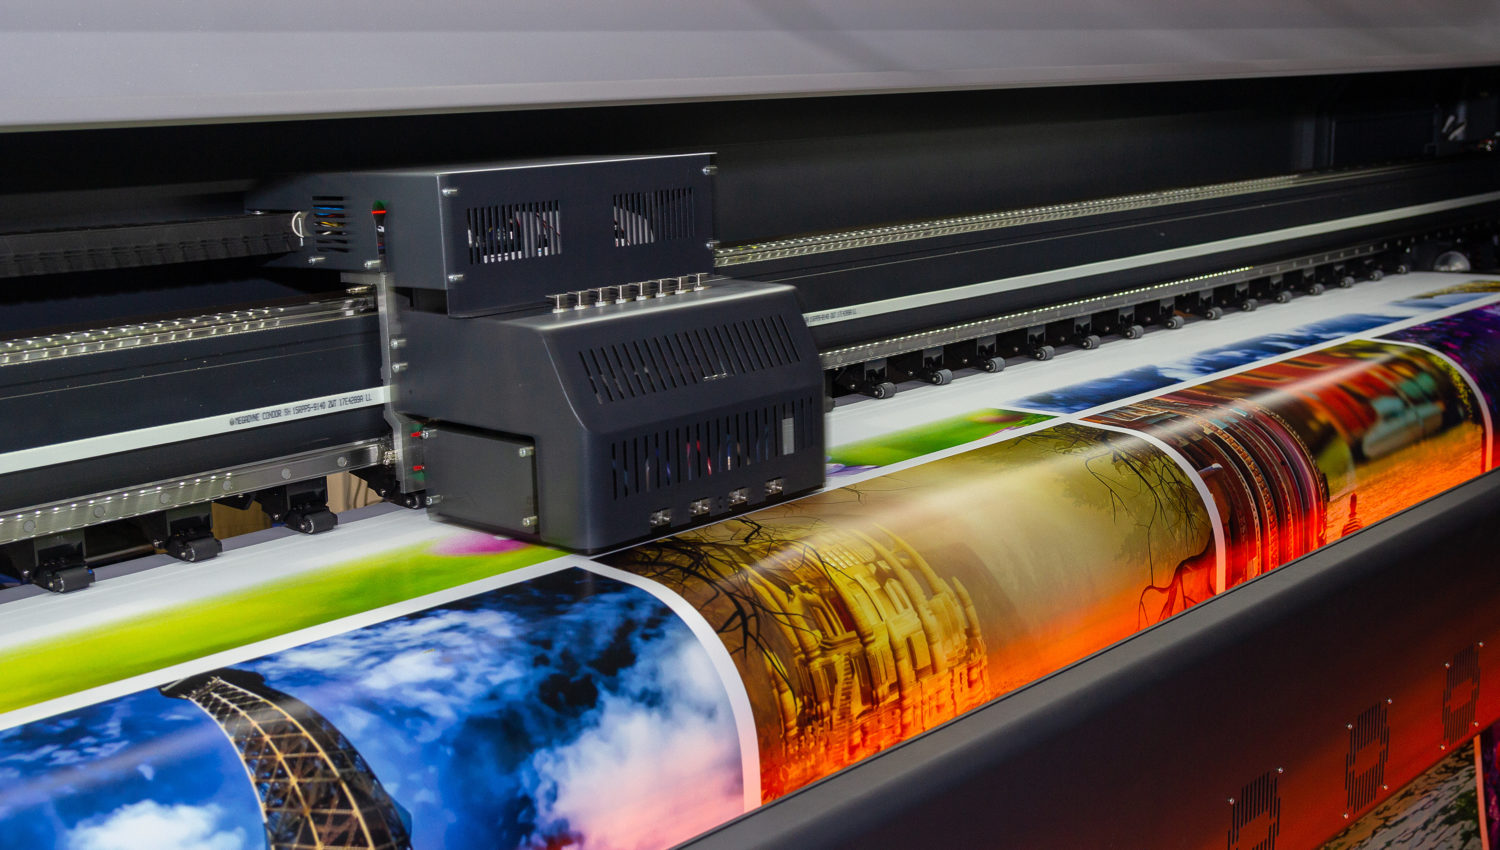 Vinyl Banners: Market your business in all seasons